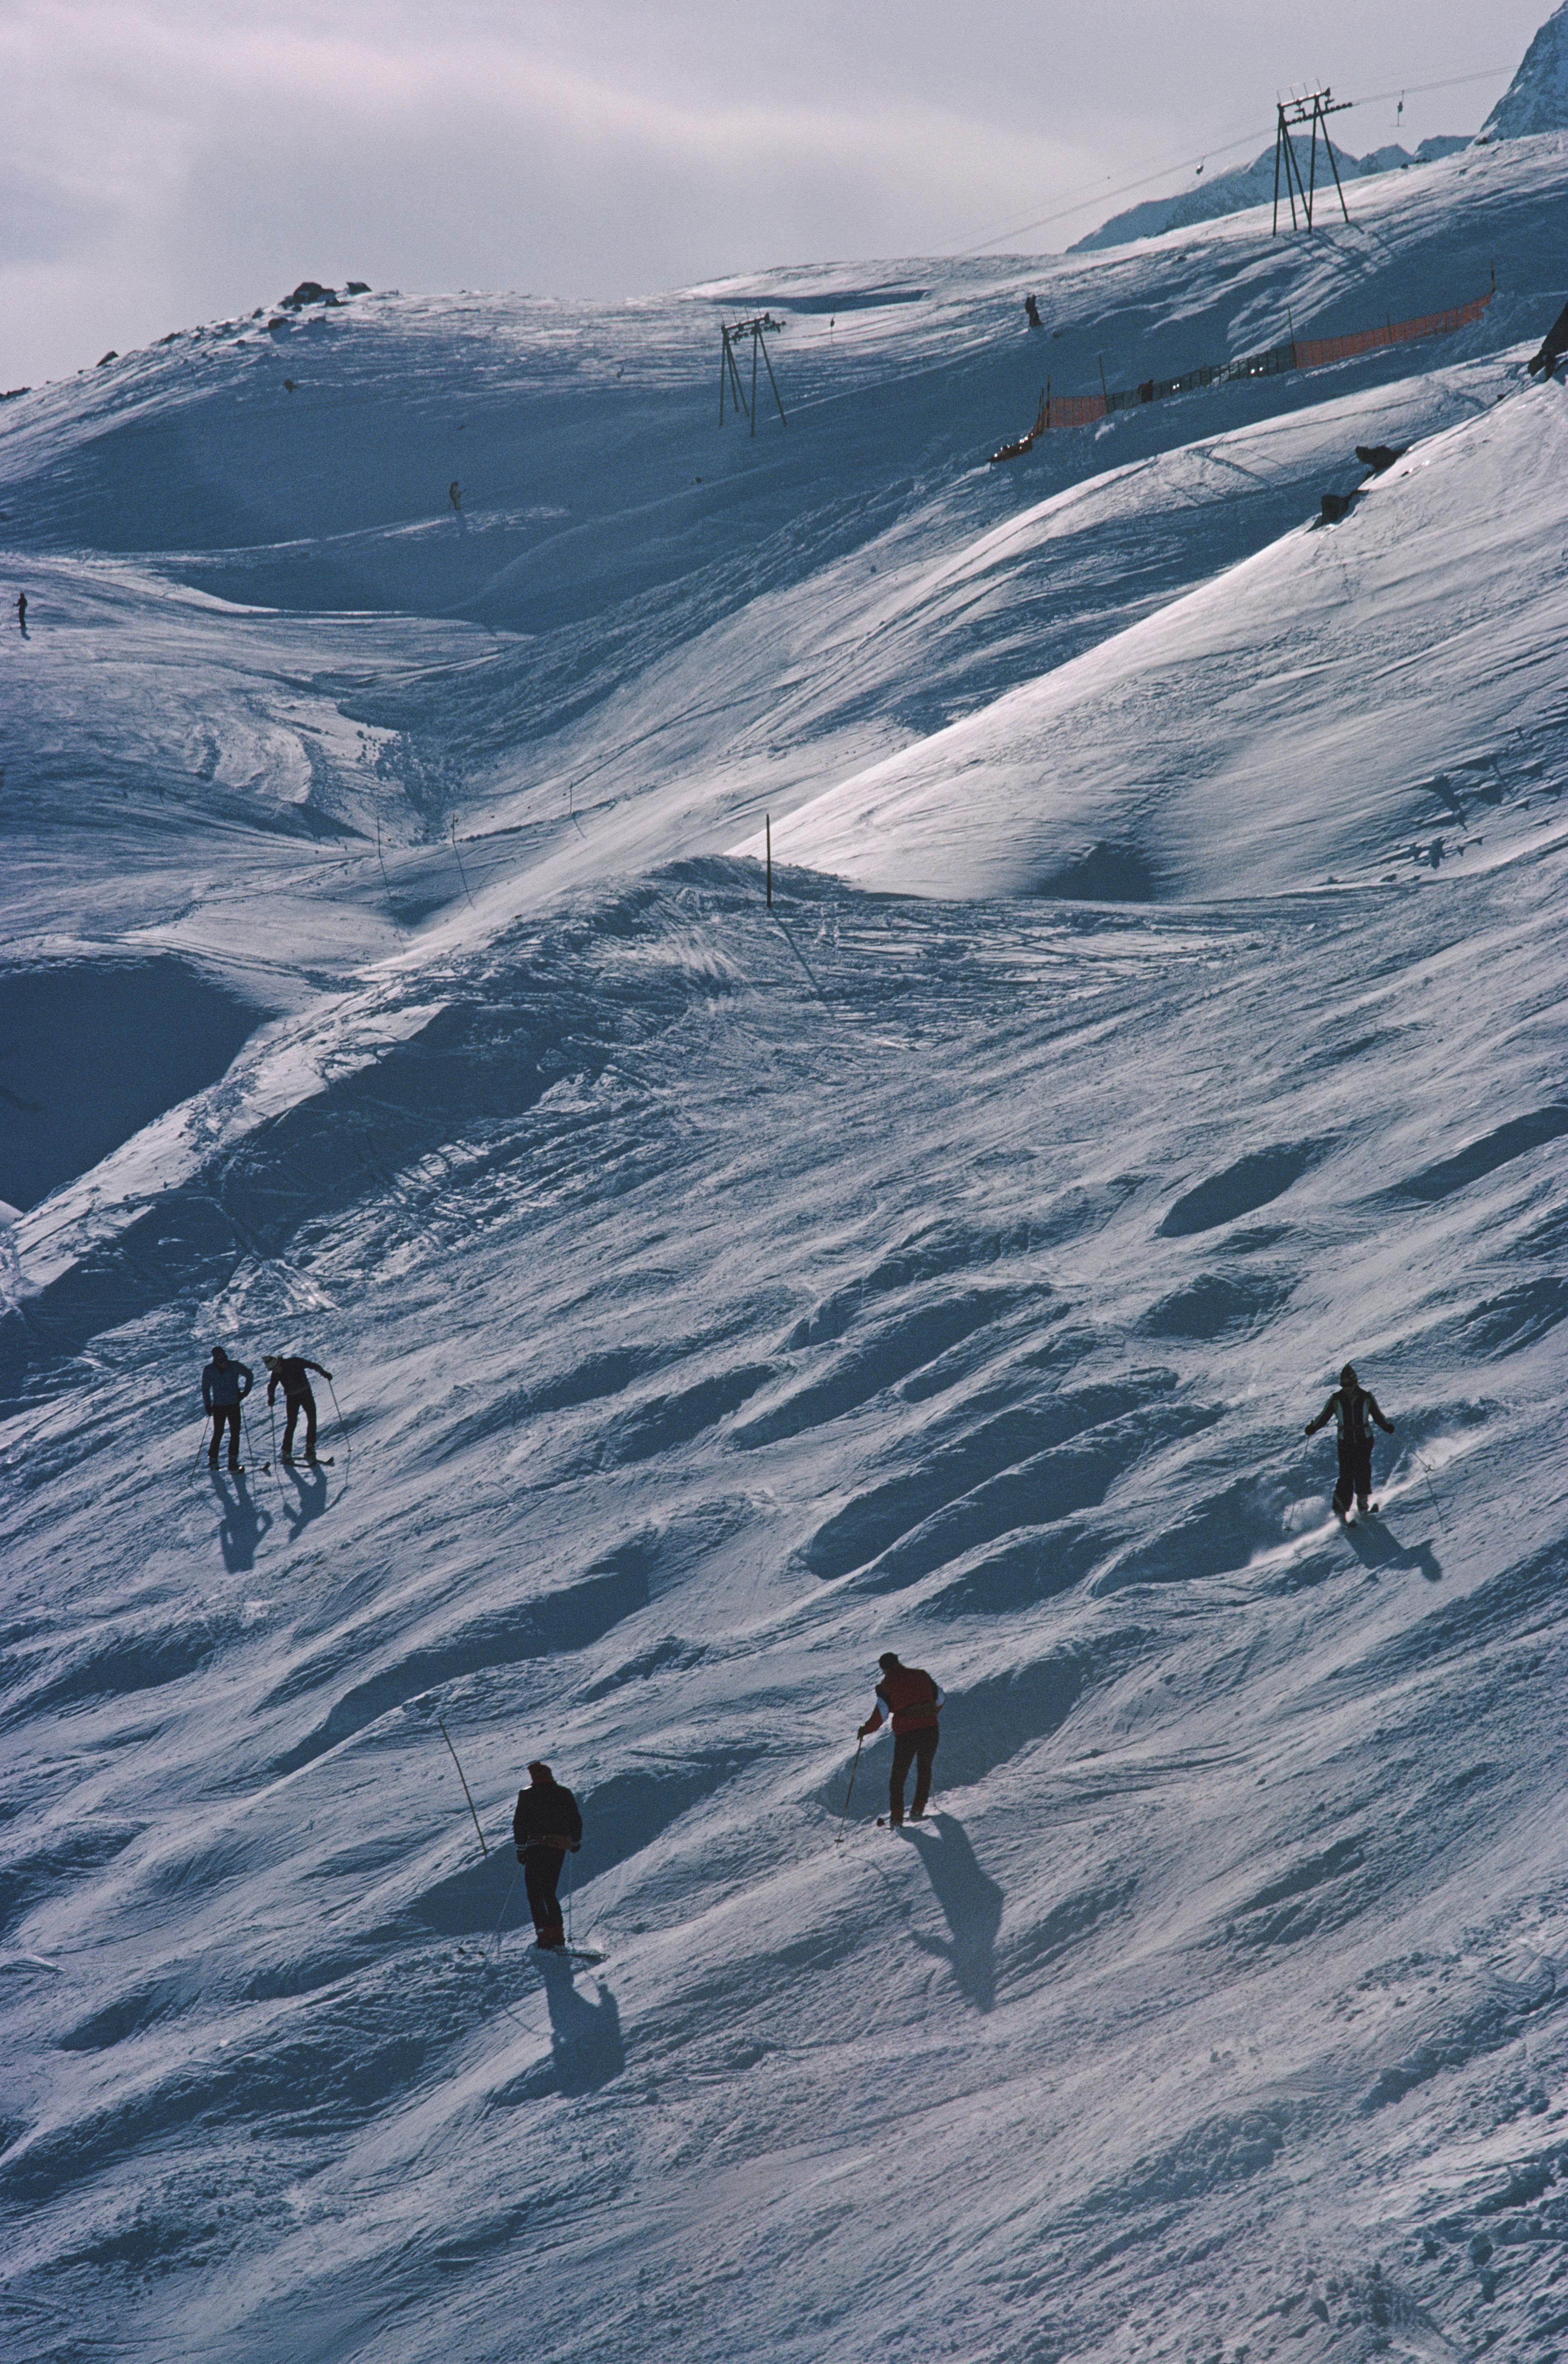 'Skiing At St. Moritz'  1978 Slim Aarons Limited Estate Edition Print 

Skiers on a slope in St Moritz, Switzerland, March 1978. 

Produced from the original transparency
Certificate of authenticity supplied 
Archive stamped

Paper Size  24x20